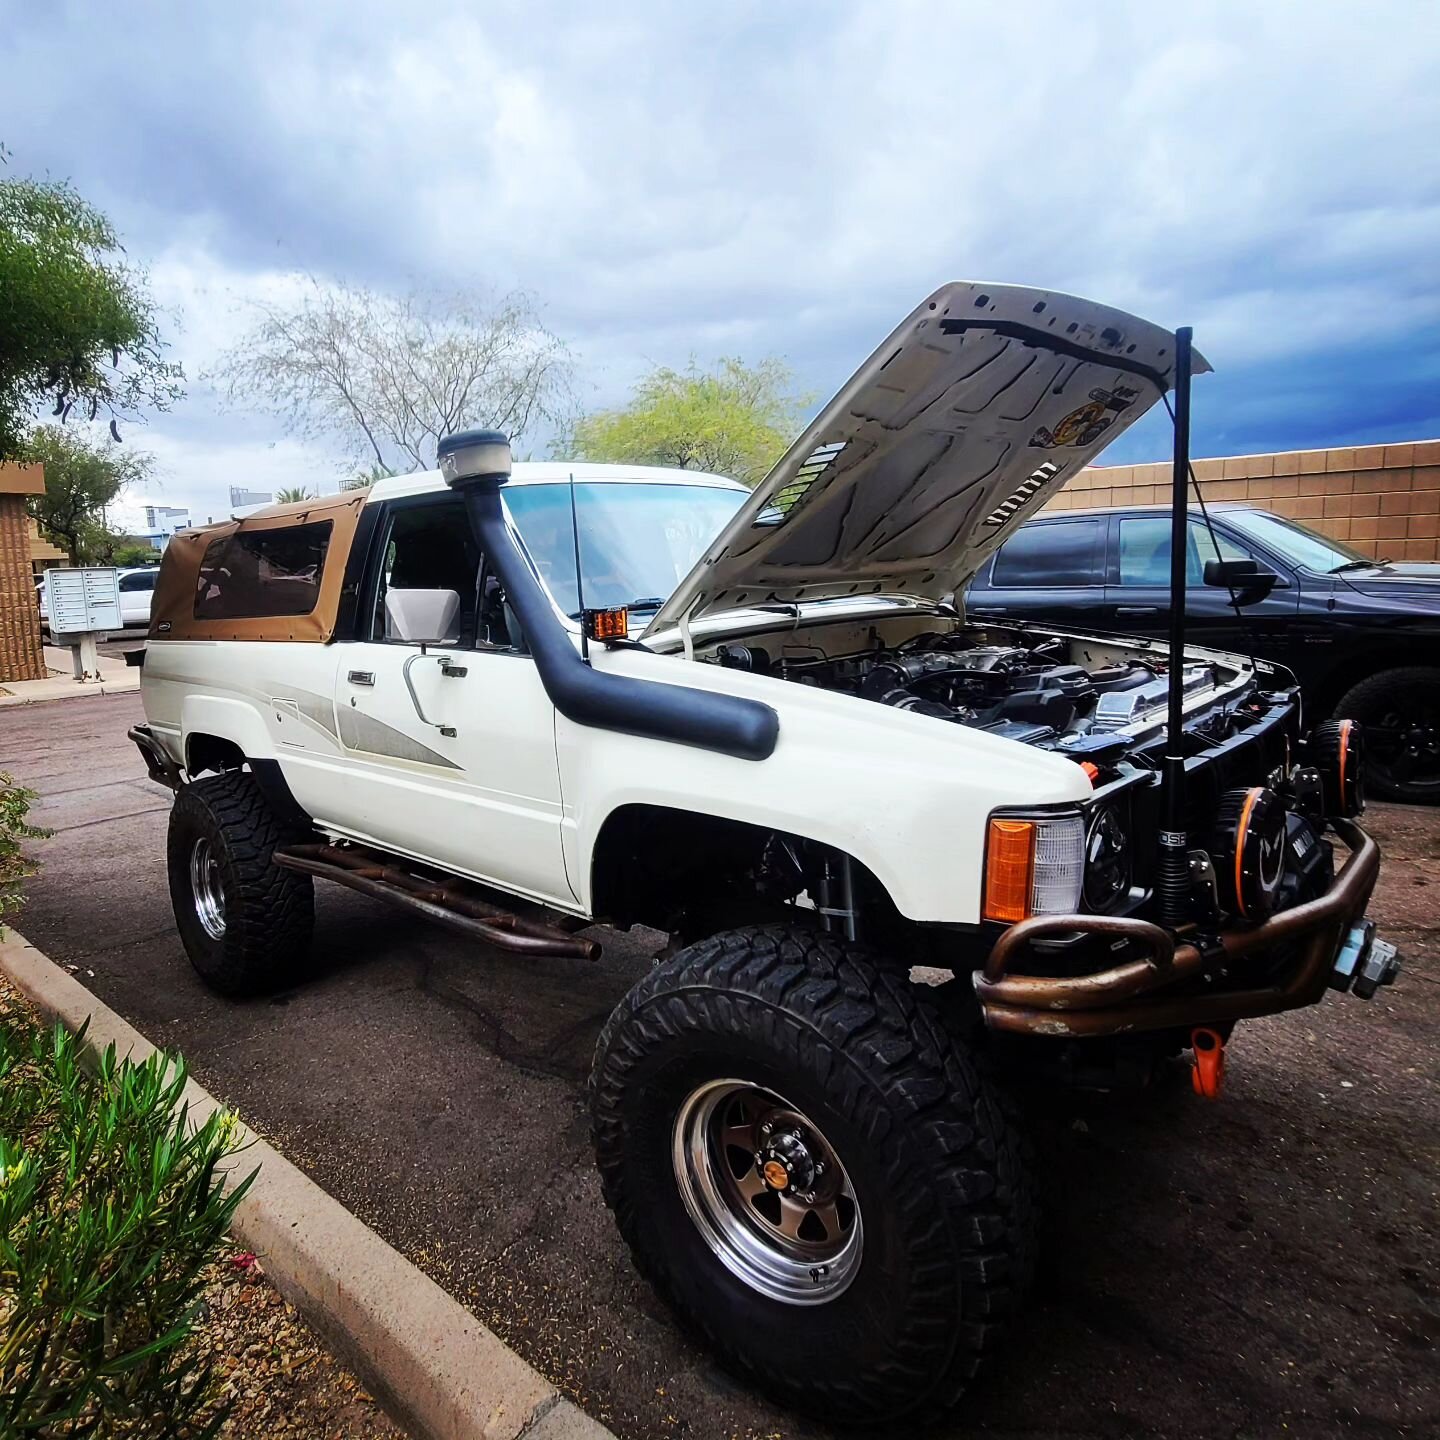 ______________________________ 
AKINA MOTORSPORTZ (since 2004) 
129 S. SMITH RD #102:
TEMPE AZ 85281 :
Call or Text 480:968:2991:

General Maintenance : 
Electrical Repair : 
Suspension : 
Performance Upgrades :
Welding &amp; Fabrication : 
Engine &a